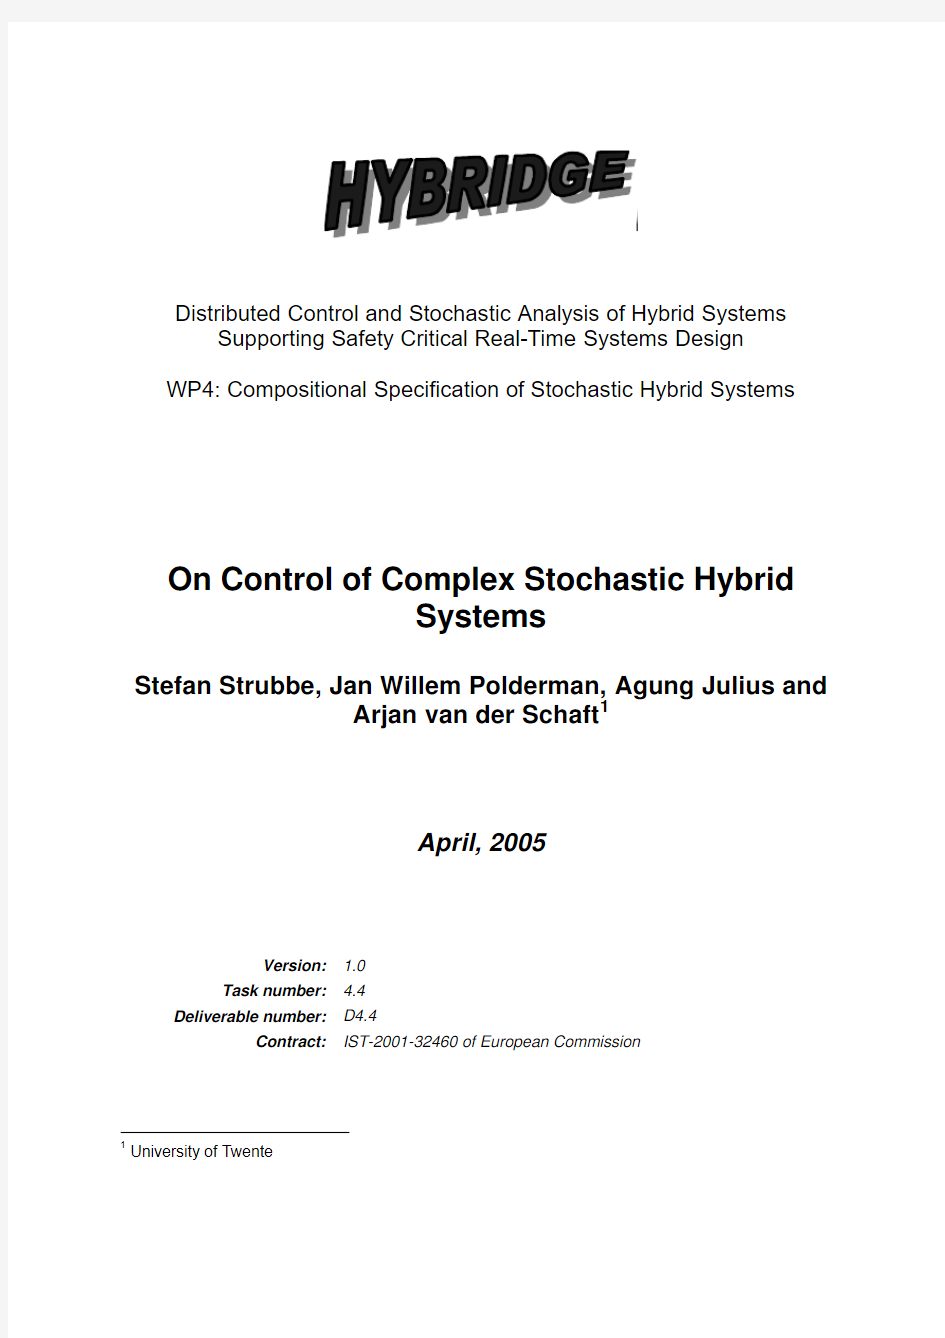 Project Distributed Control and Stochastic Analysis of Hybrid Systems Supporting Safety Cri